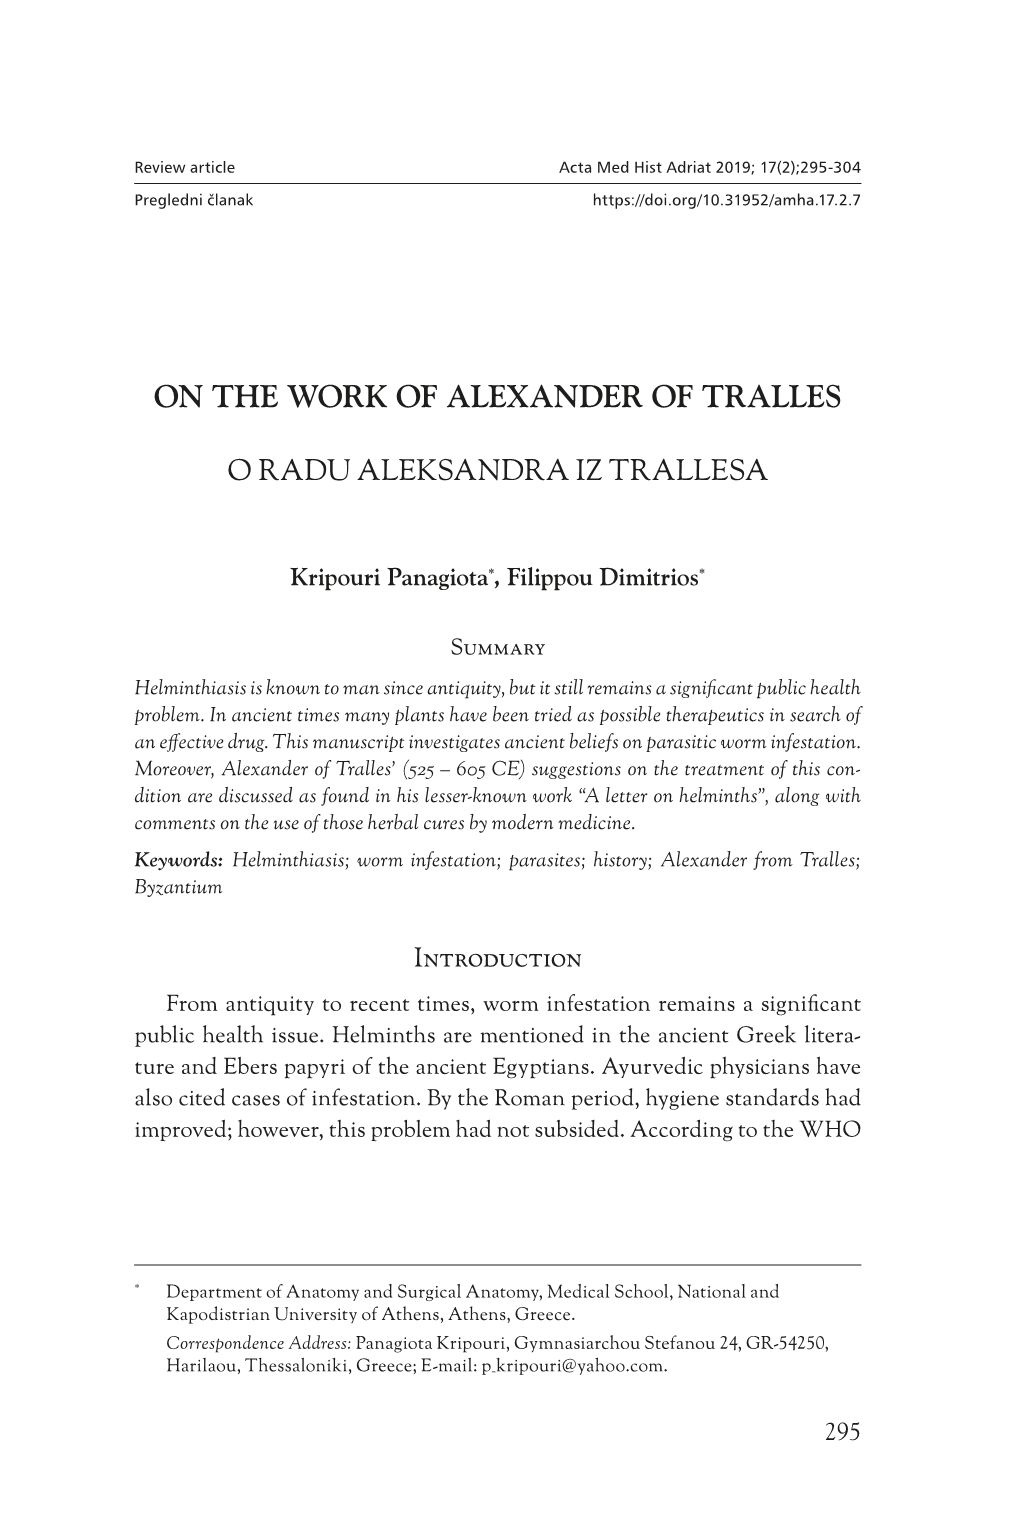 On the Work of Alexander of Tralles